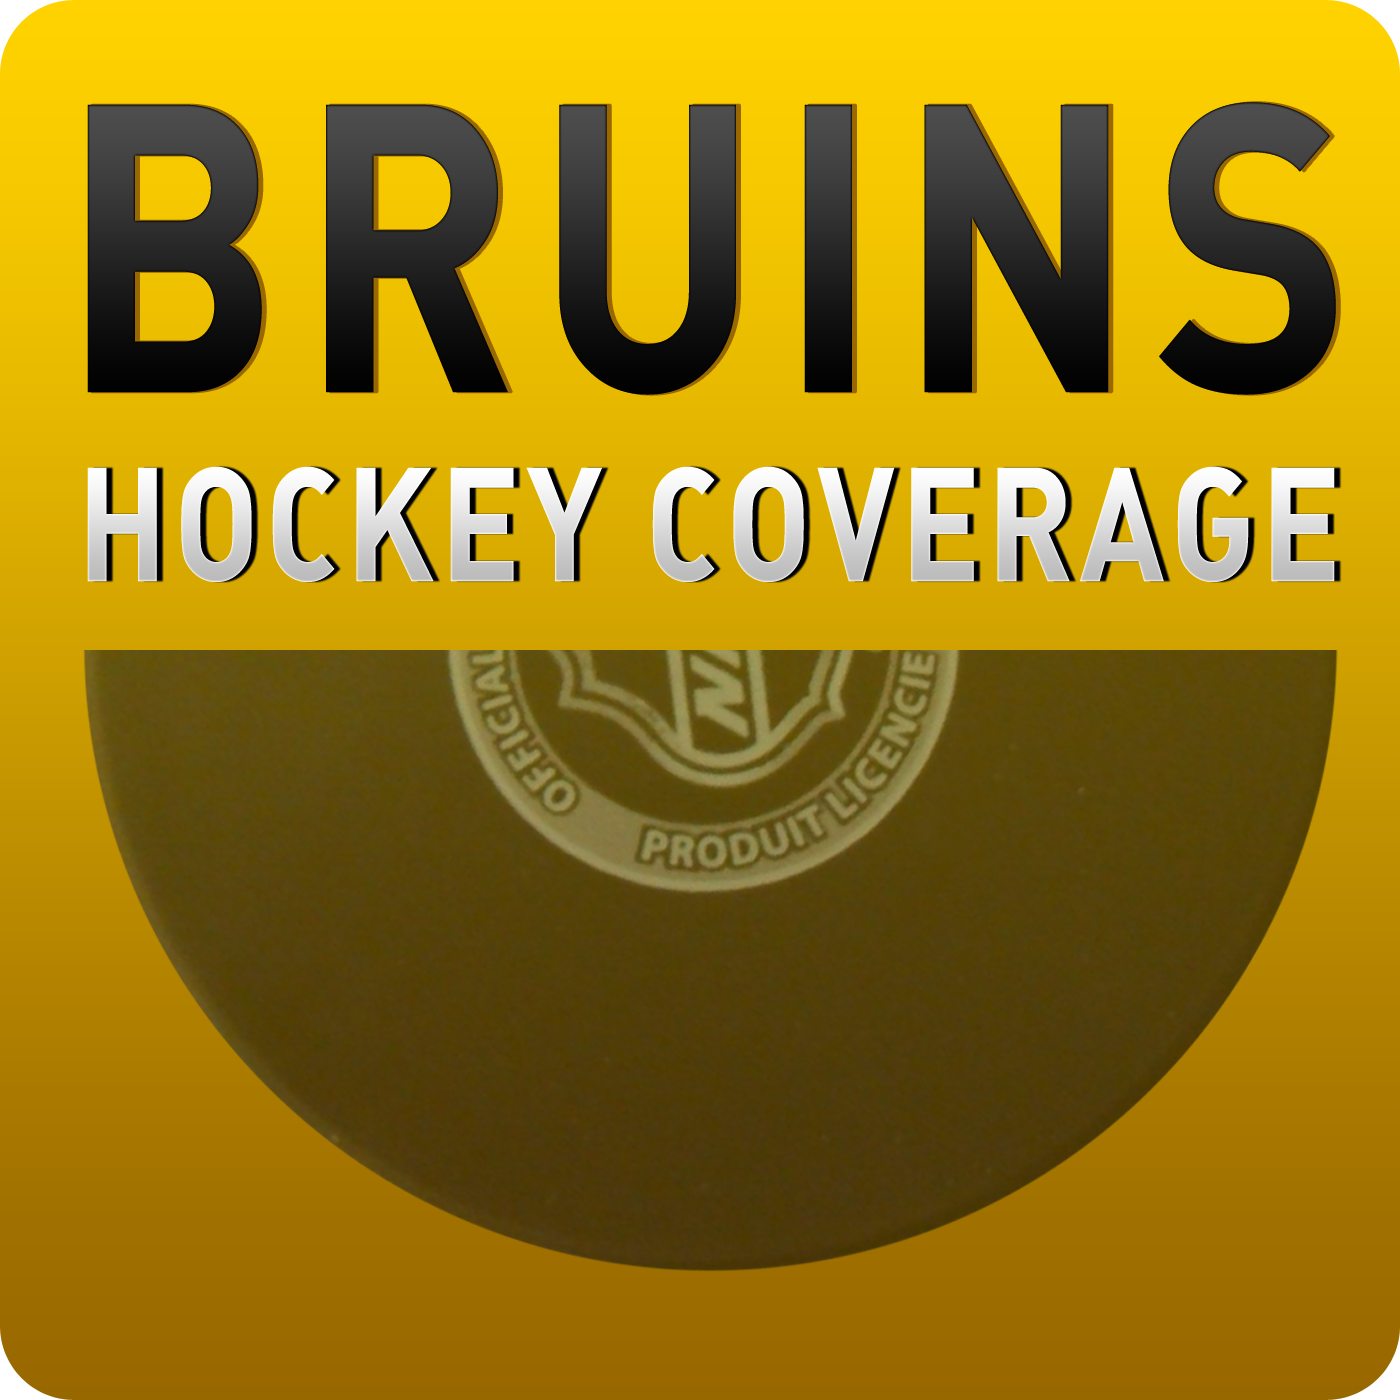 GK- NBC's Brian Boucher joins Gresh and Keefe to discuss the Bruins and The Stanley Cup playoffs